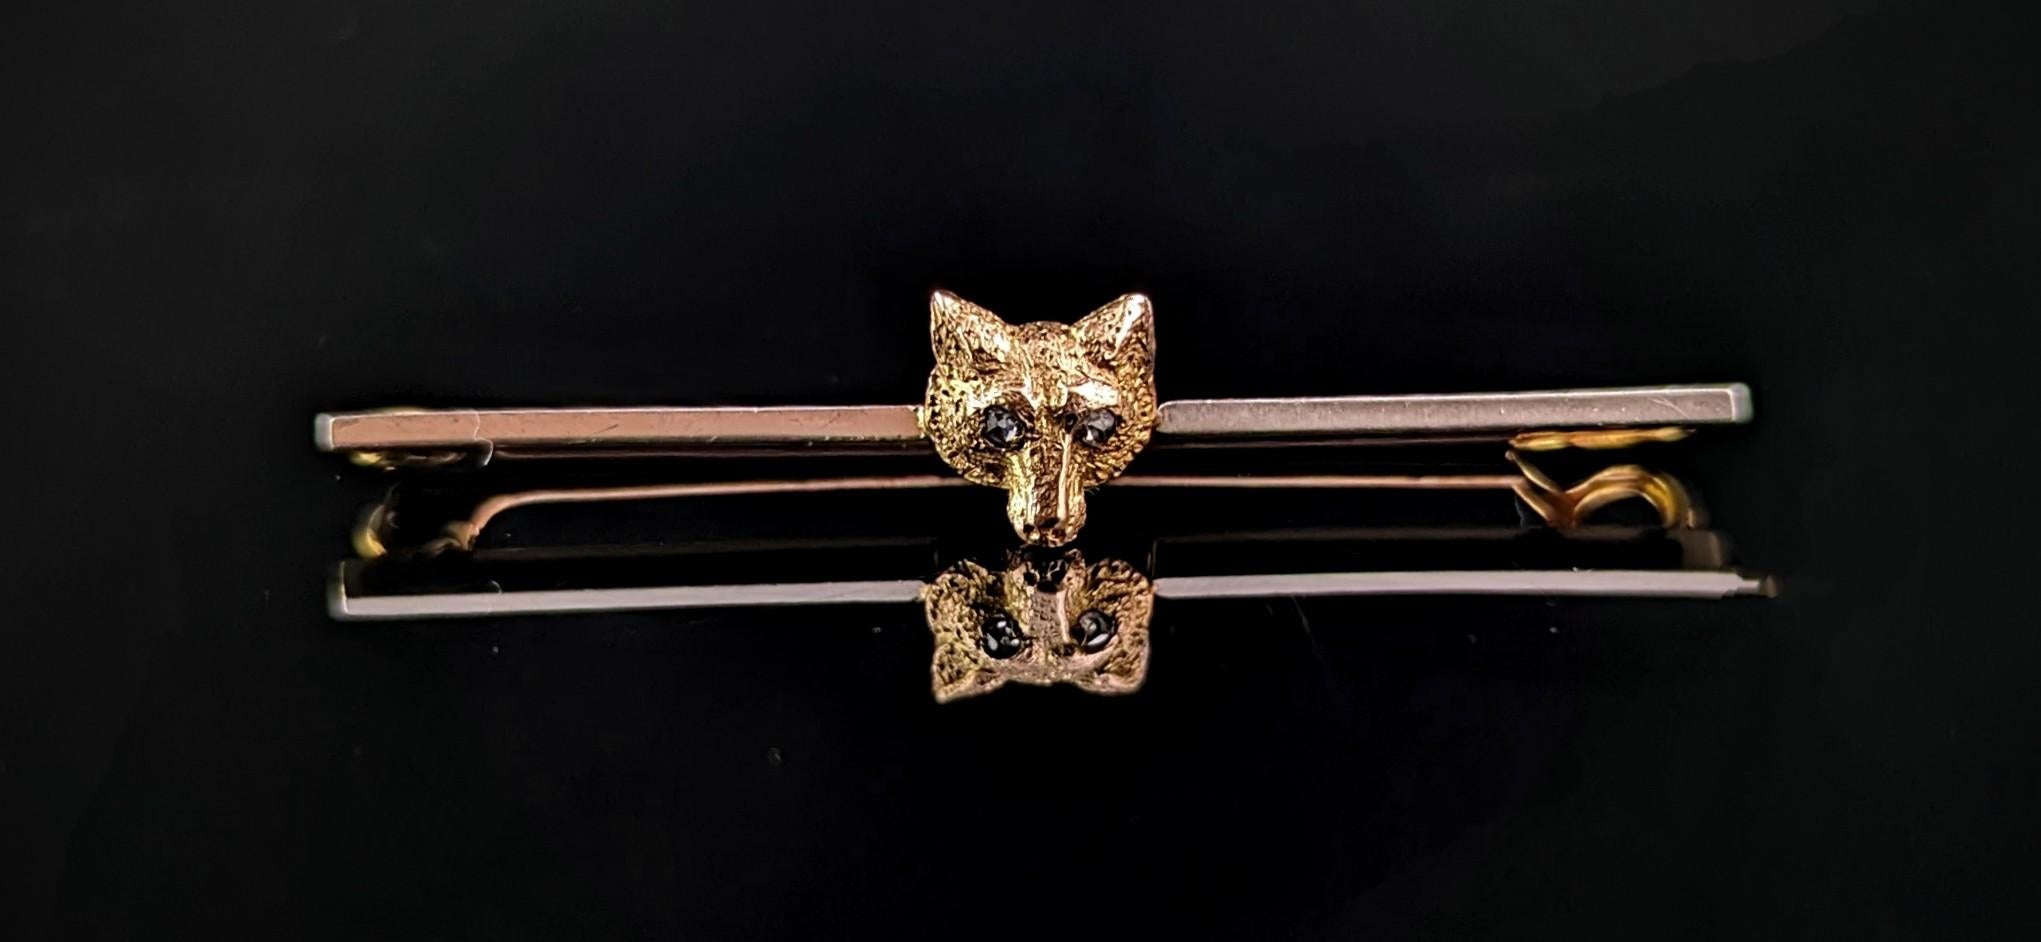 You can't help but be charmed by this very well designed antique Edwardian era fox mask brooch or pin.

The face of the little fox is nicely detailed and textured and he has little diamond set eyes providing a nice sparkle on movement.

The fox head